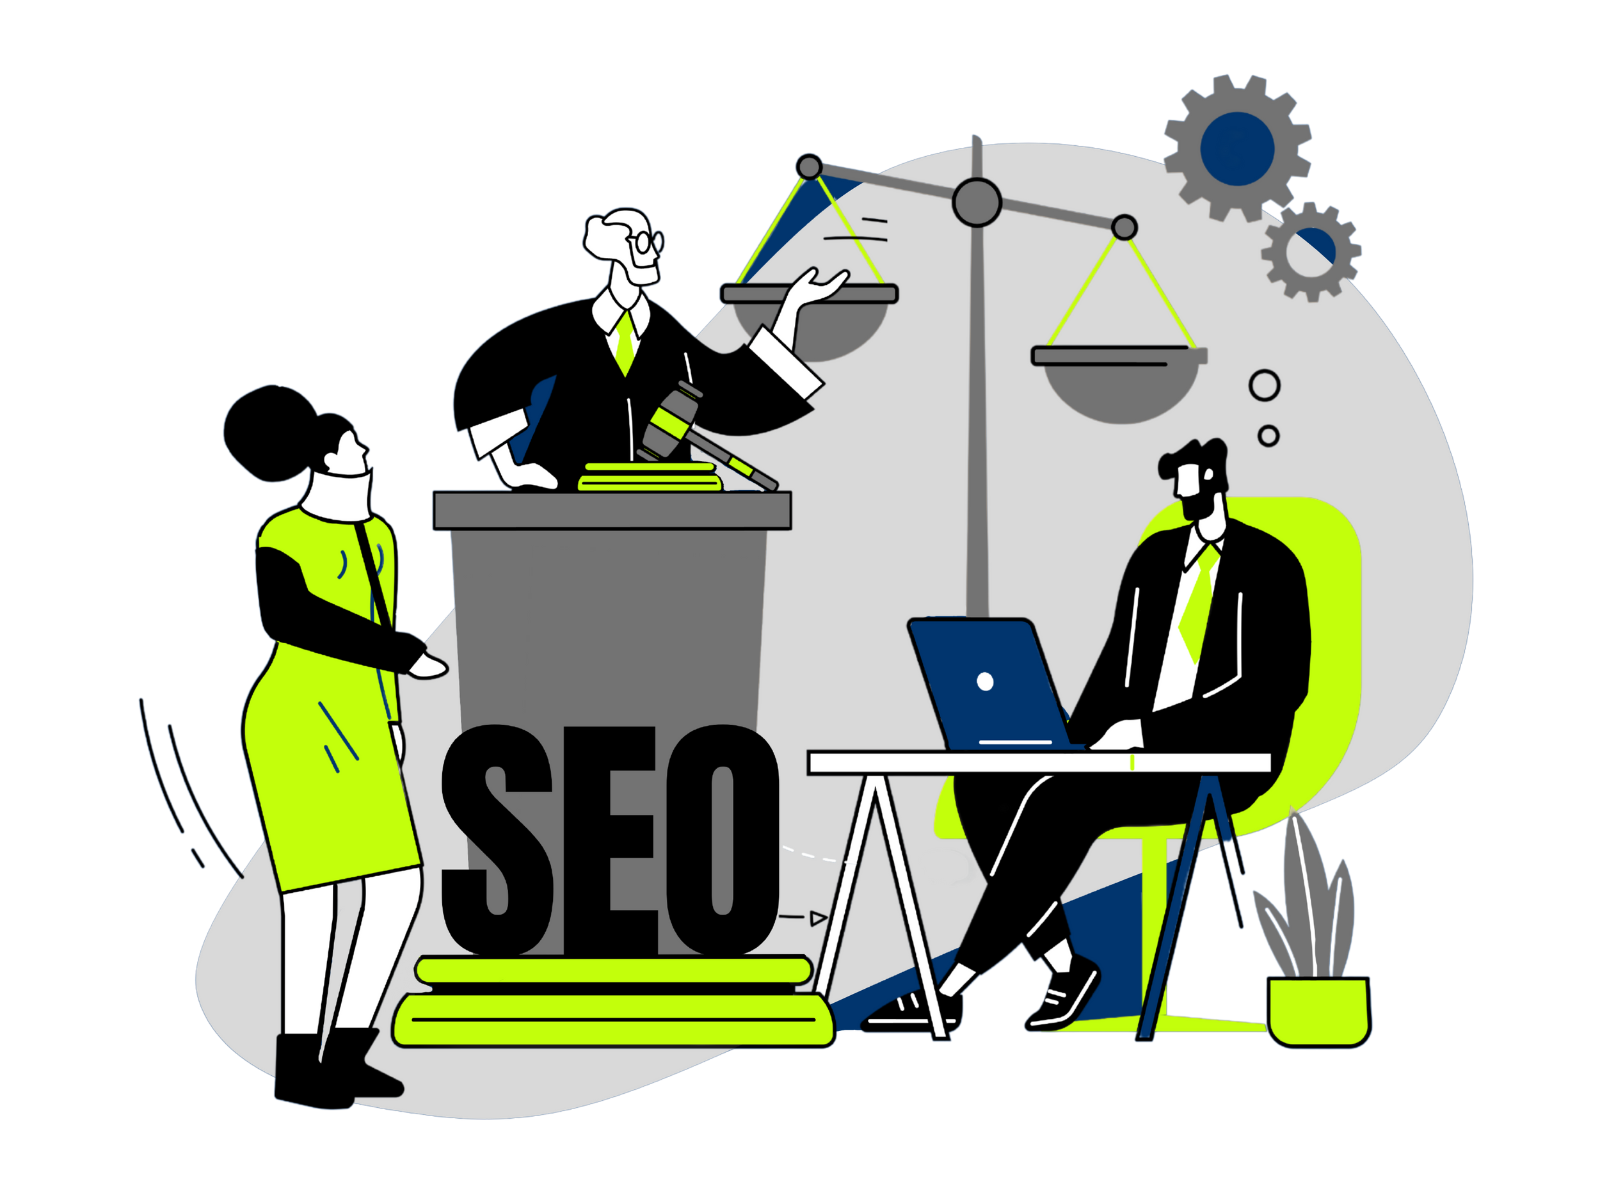 A Guide To Link Building And SEO For Lawyers: Unlock Better Rankings